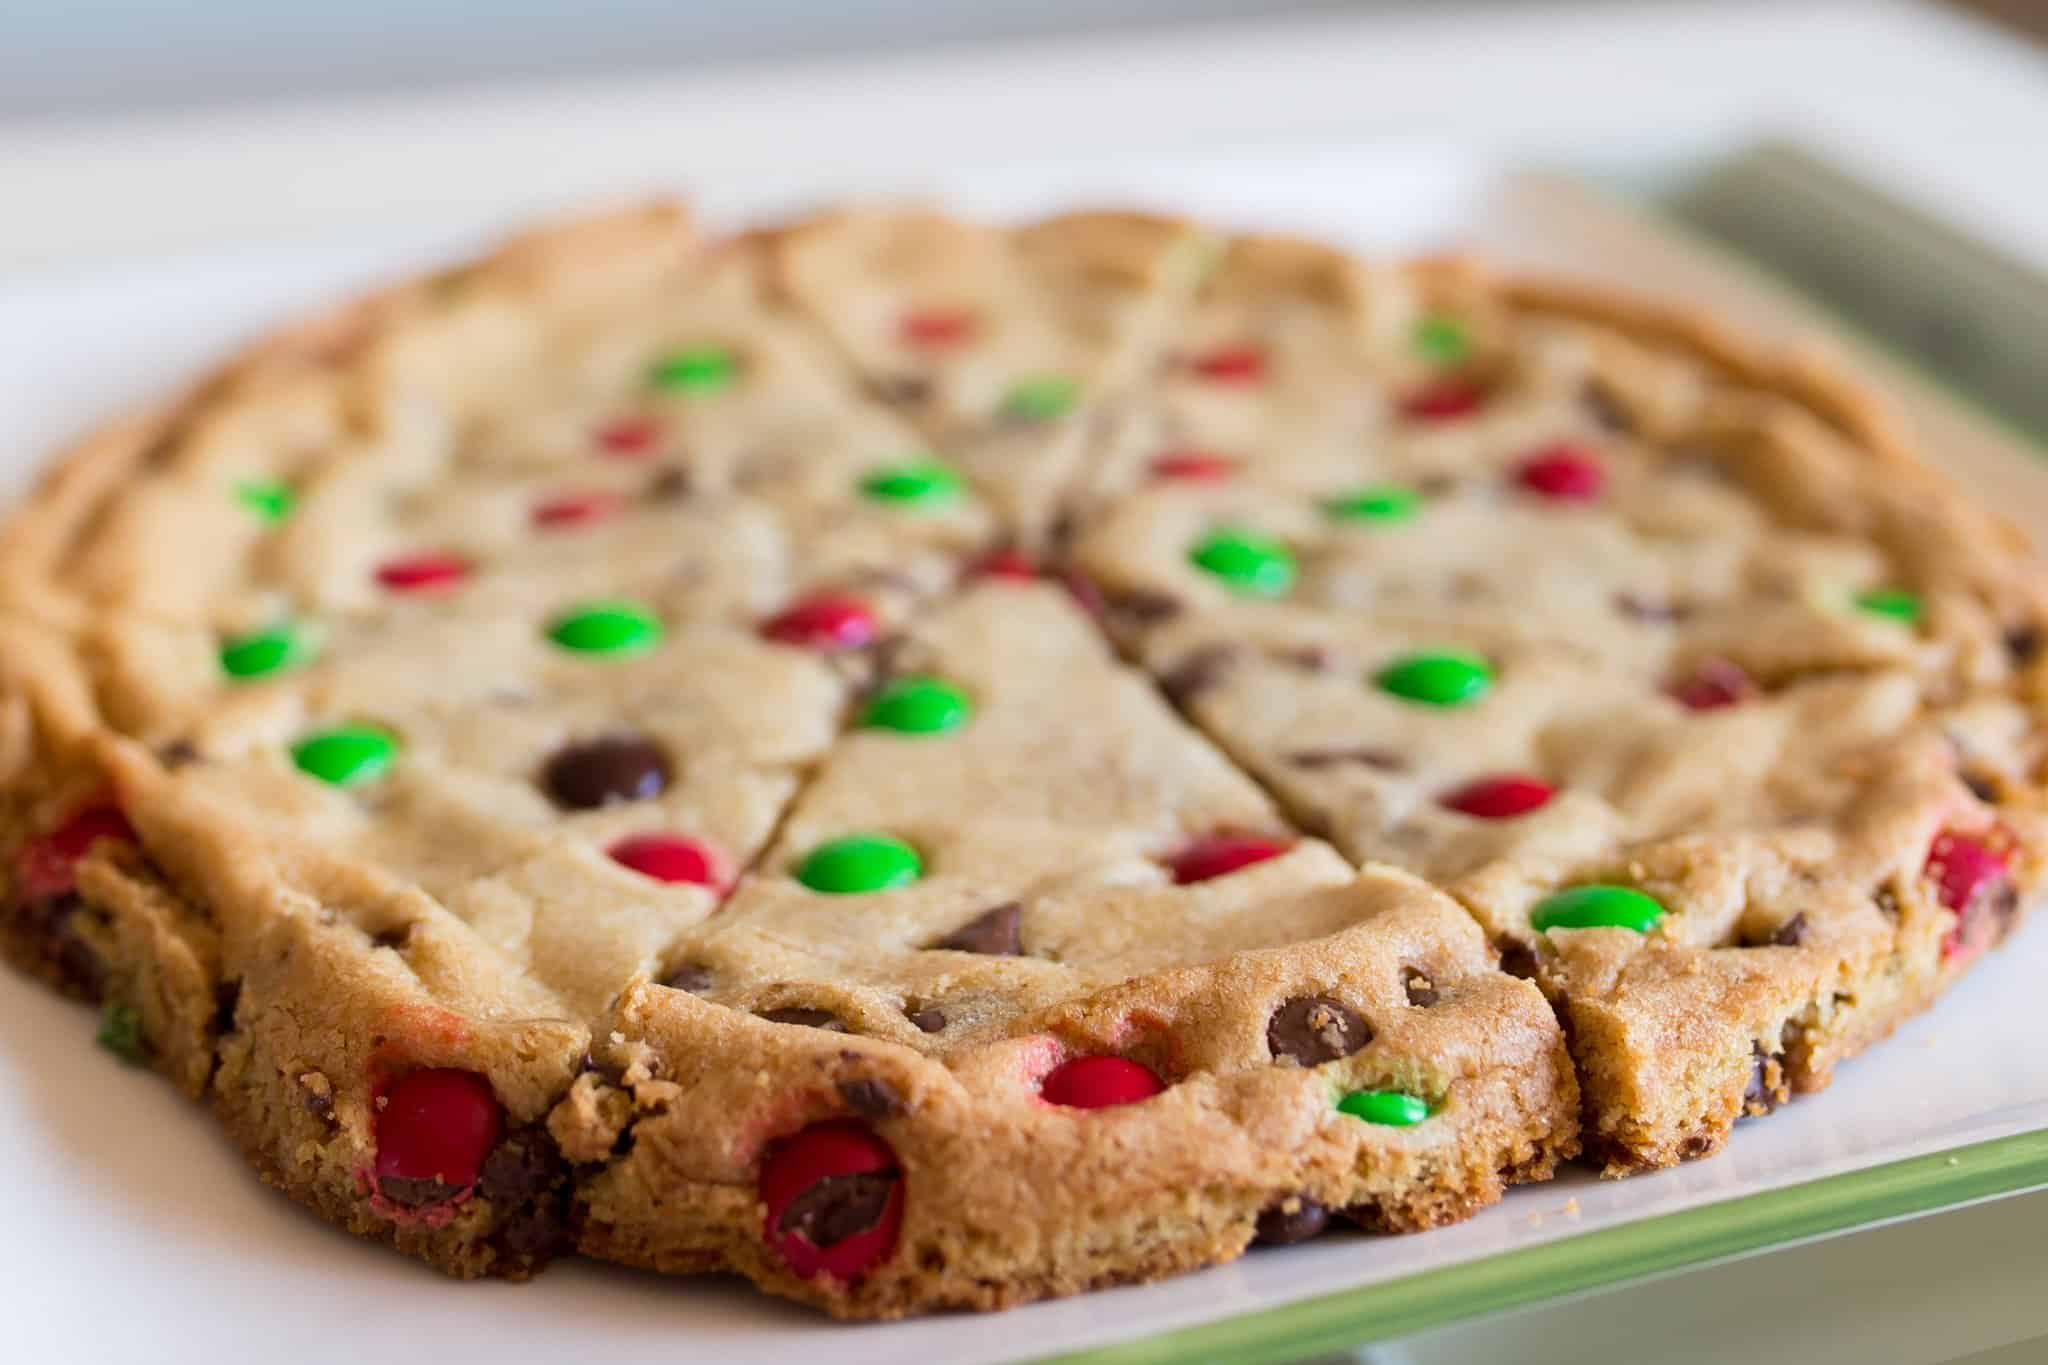 This would make a great neighbor gift or can be cut into slices as a dessert pizza!